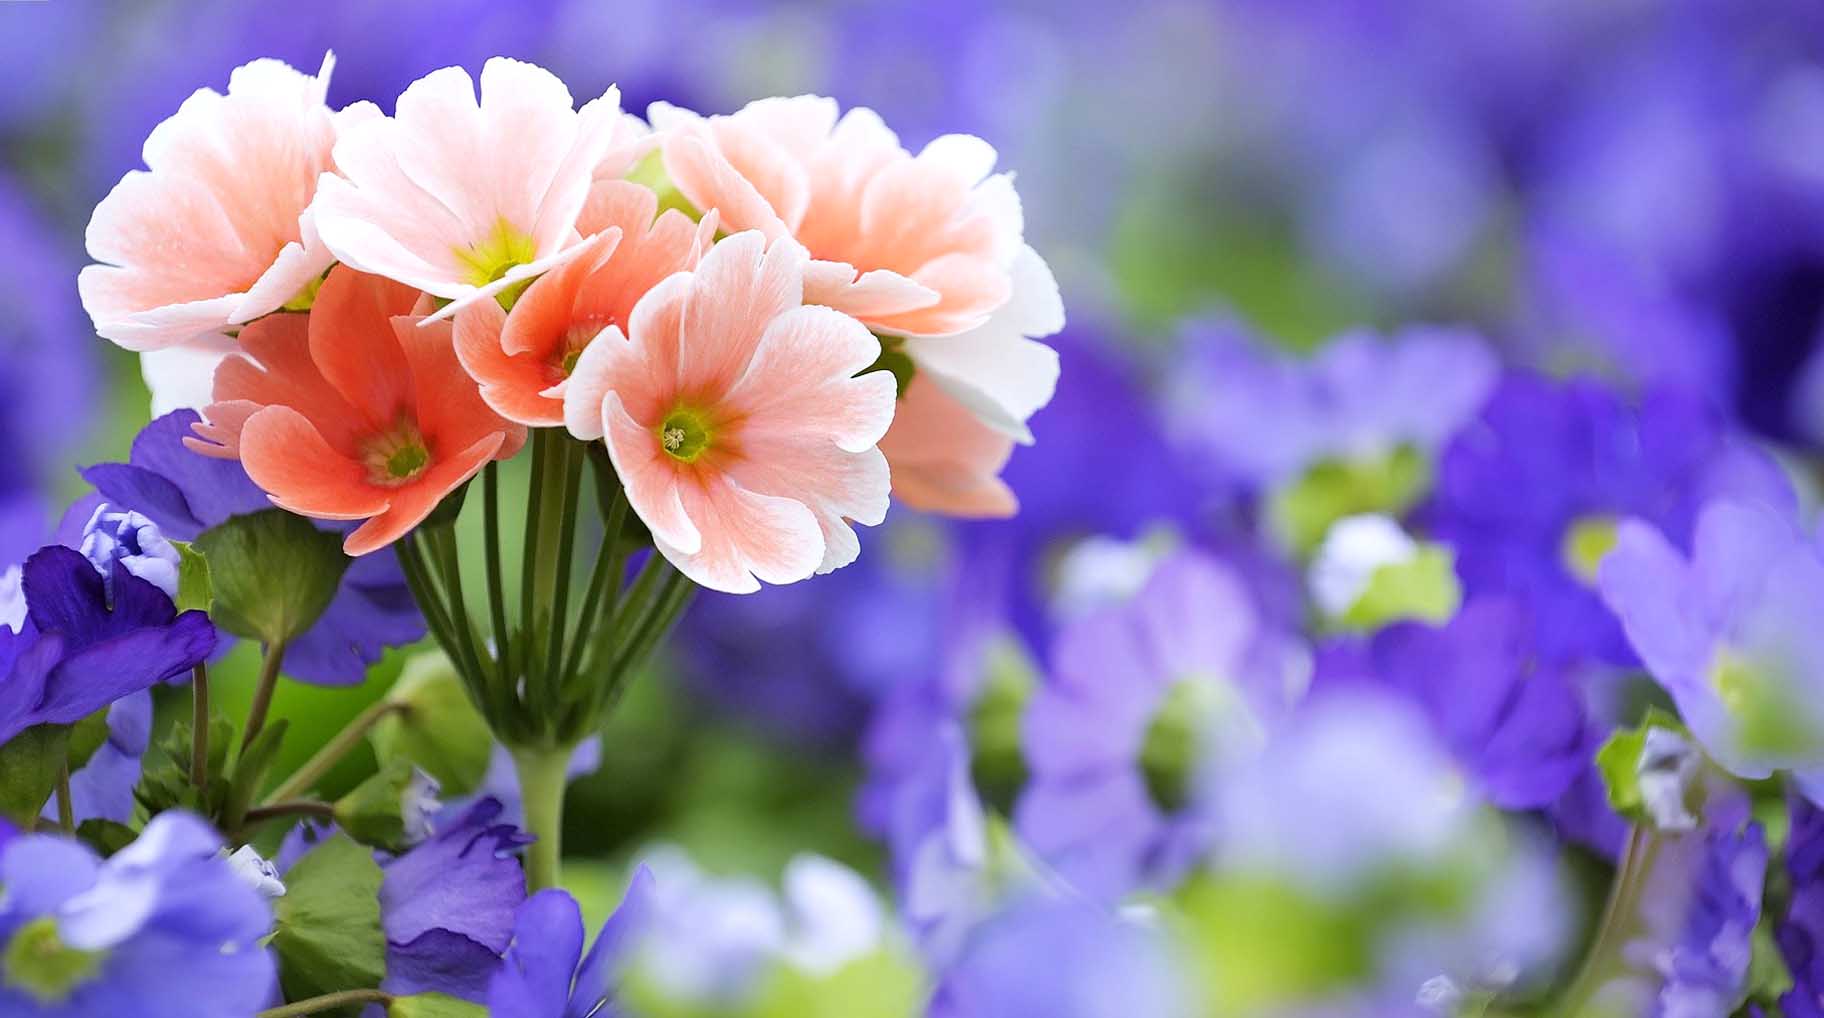 beautiful flower wallpaper for desktop free download to make your